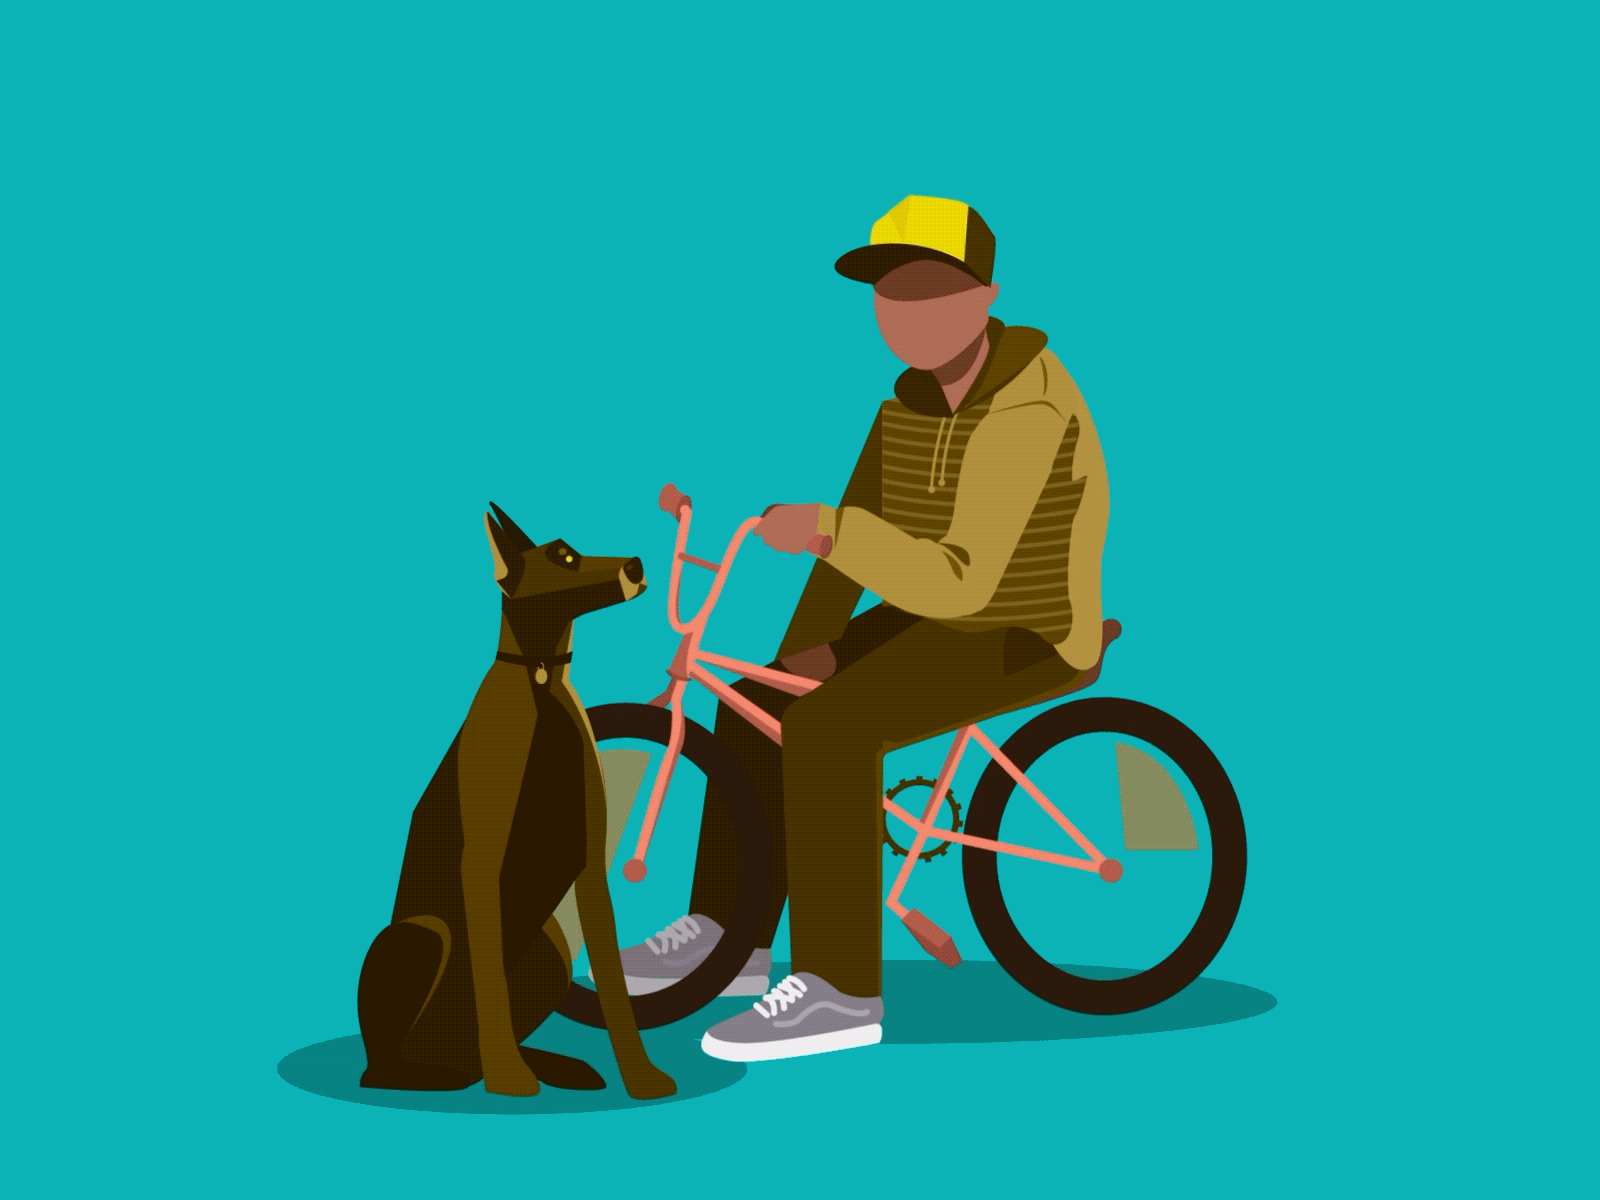 Head bop aftereffects animate animation bros cycle dog gif guy illustration